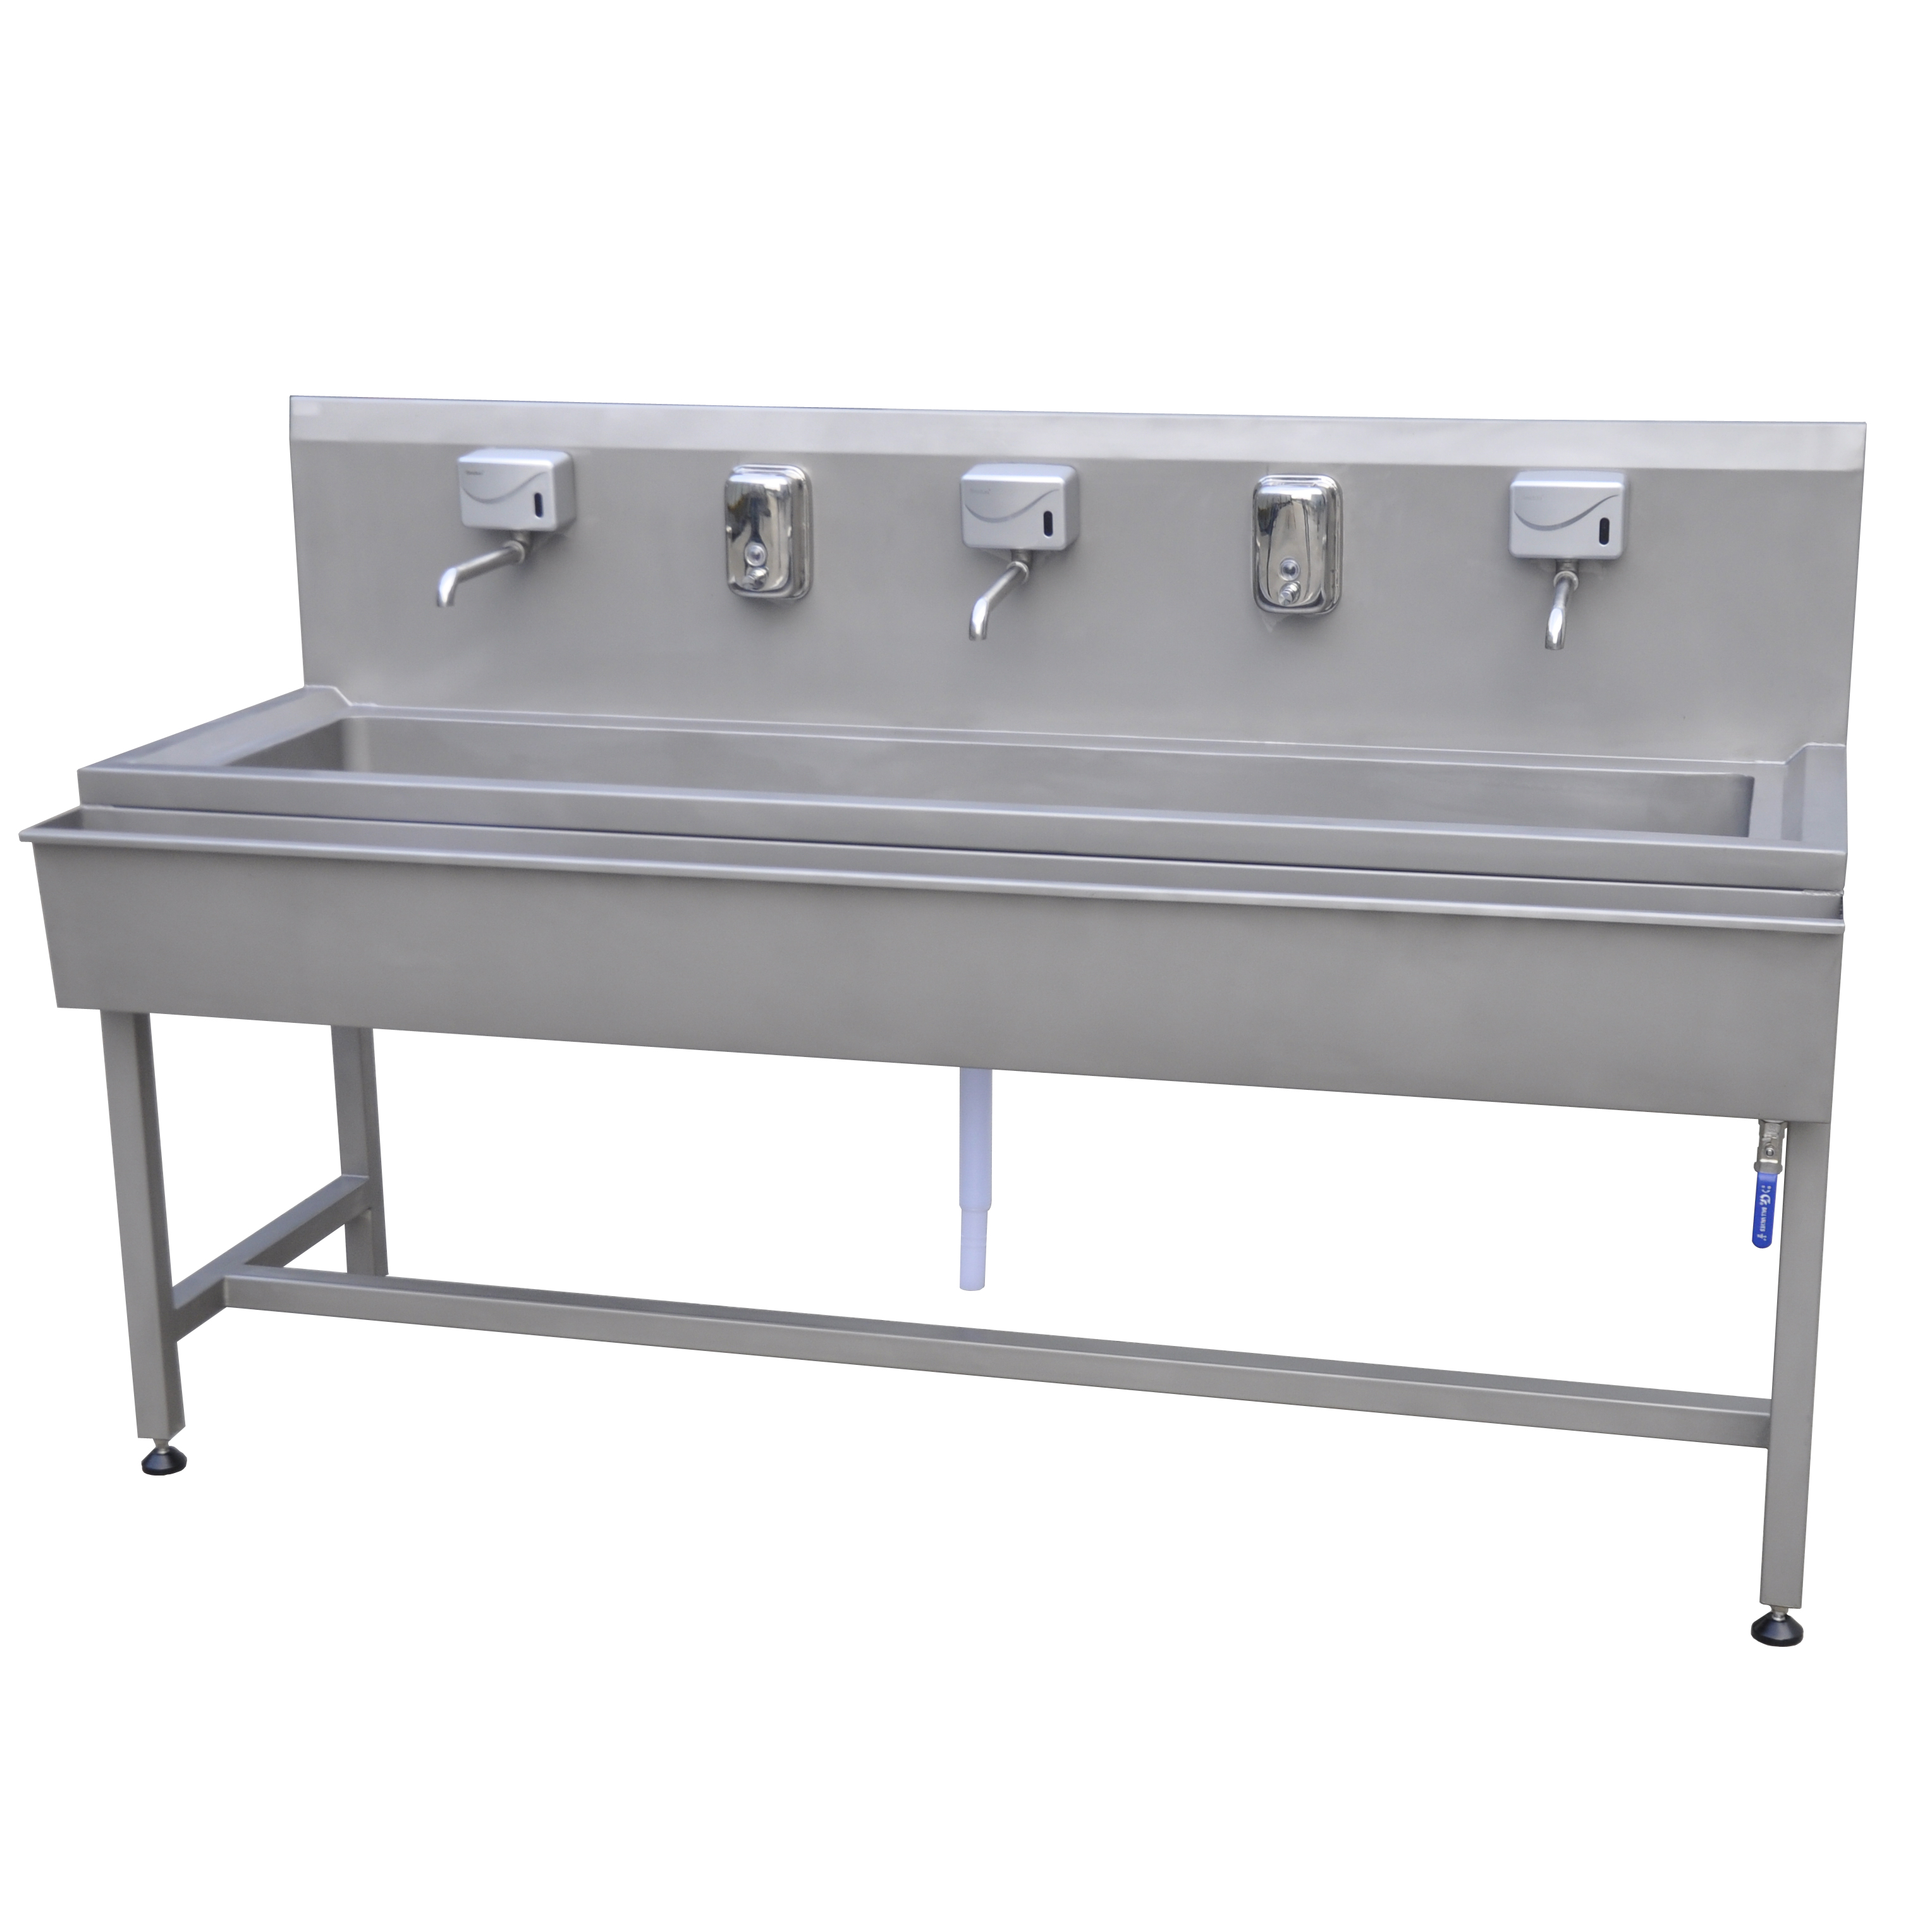 Hand washer for 3 persons